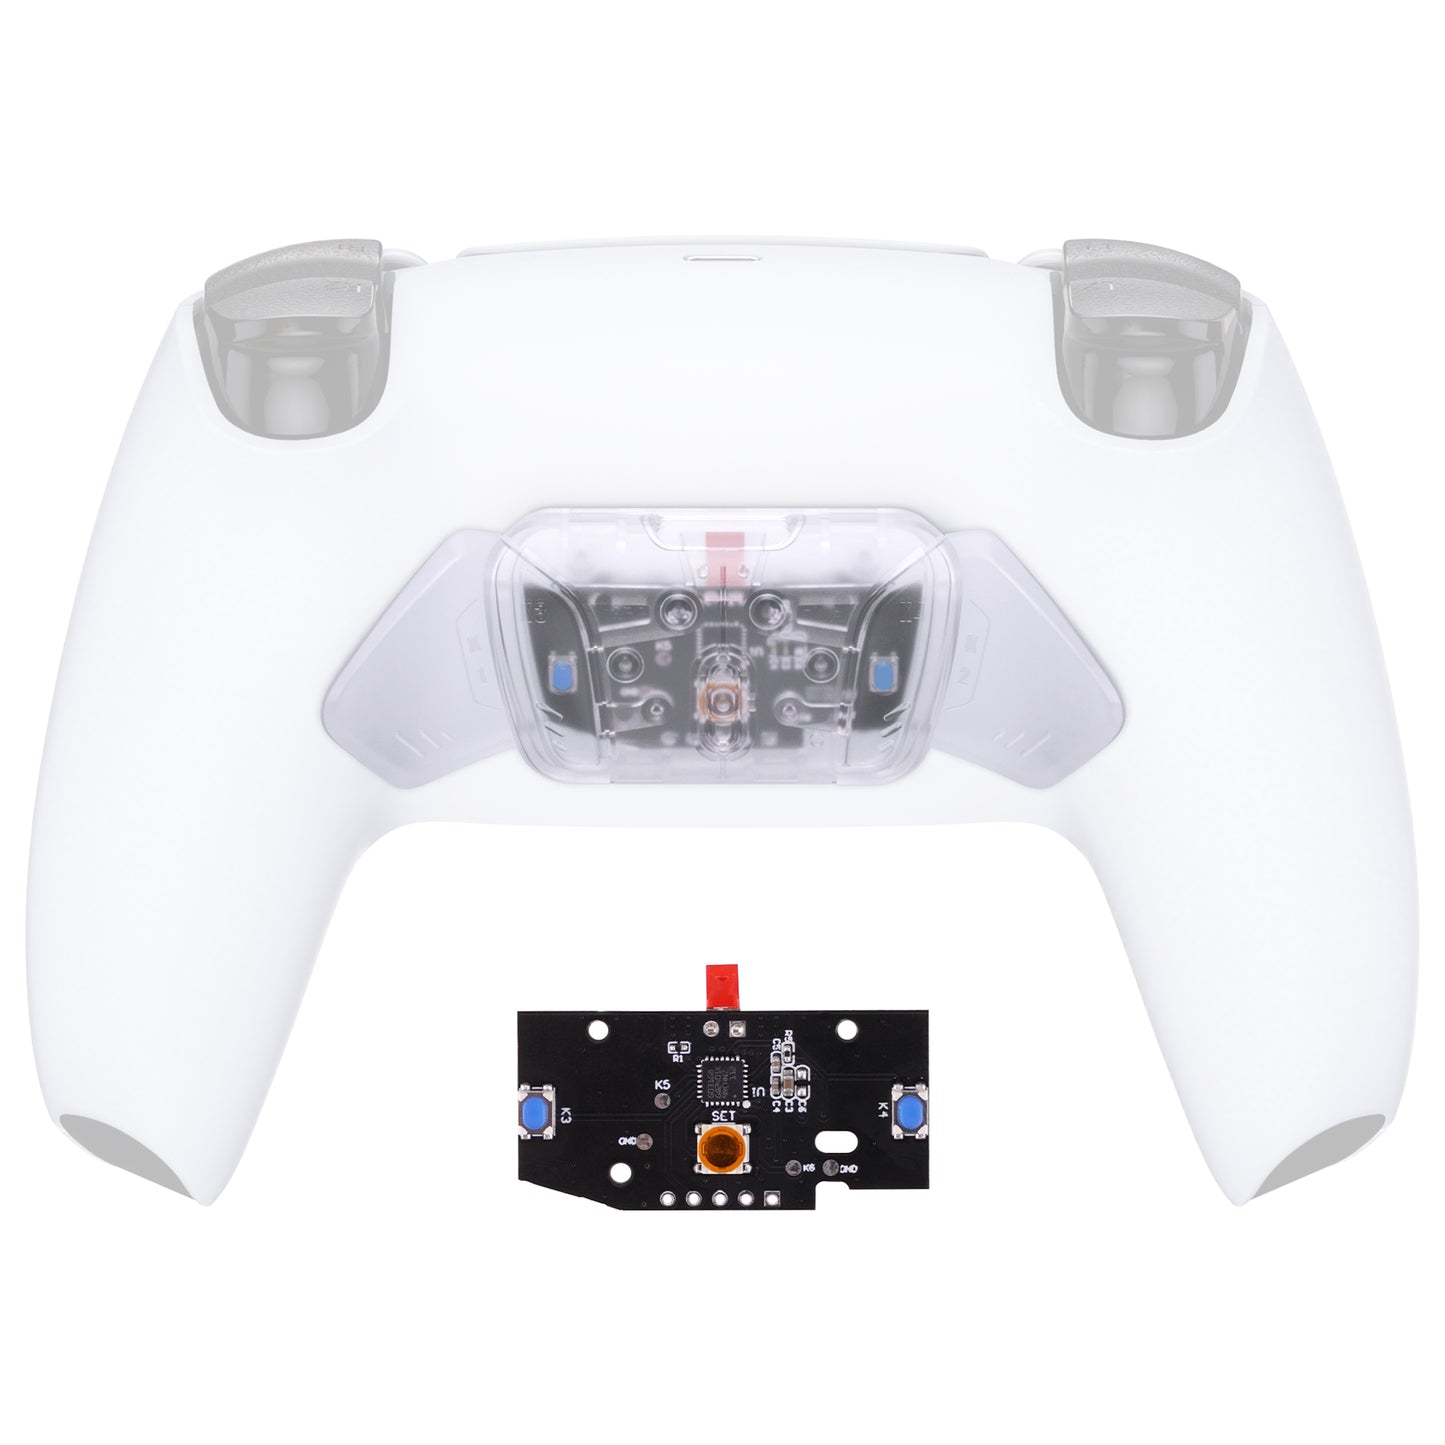 eXtremeRate Retail Turn RISE to RISE4 Kit - Redesigned Transparent Clear K1 K2 K3 K4 Back Buttons Housing & Remap PCB Board for ps5 Controller eXtremeRate RISE & RISE4 Remap kit - Controller & Other RISE Accessories NOT Included - VPFM5003P